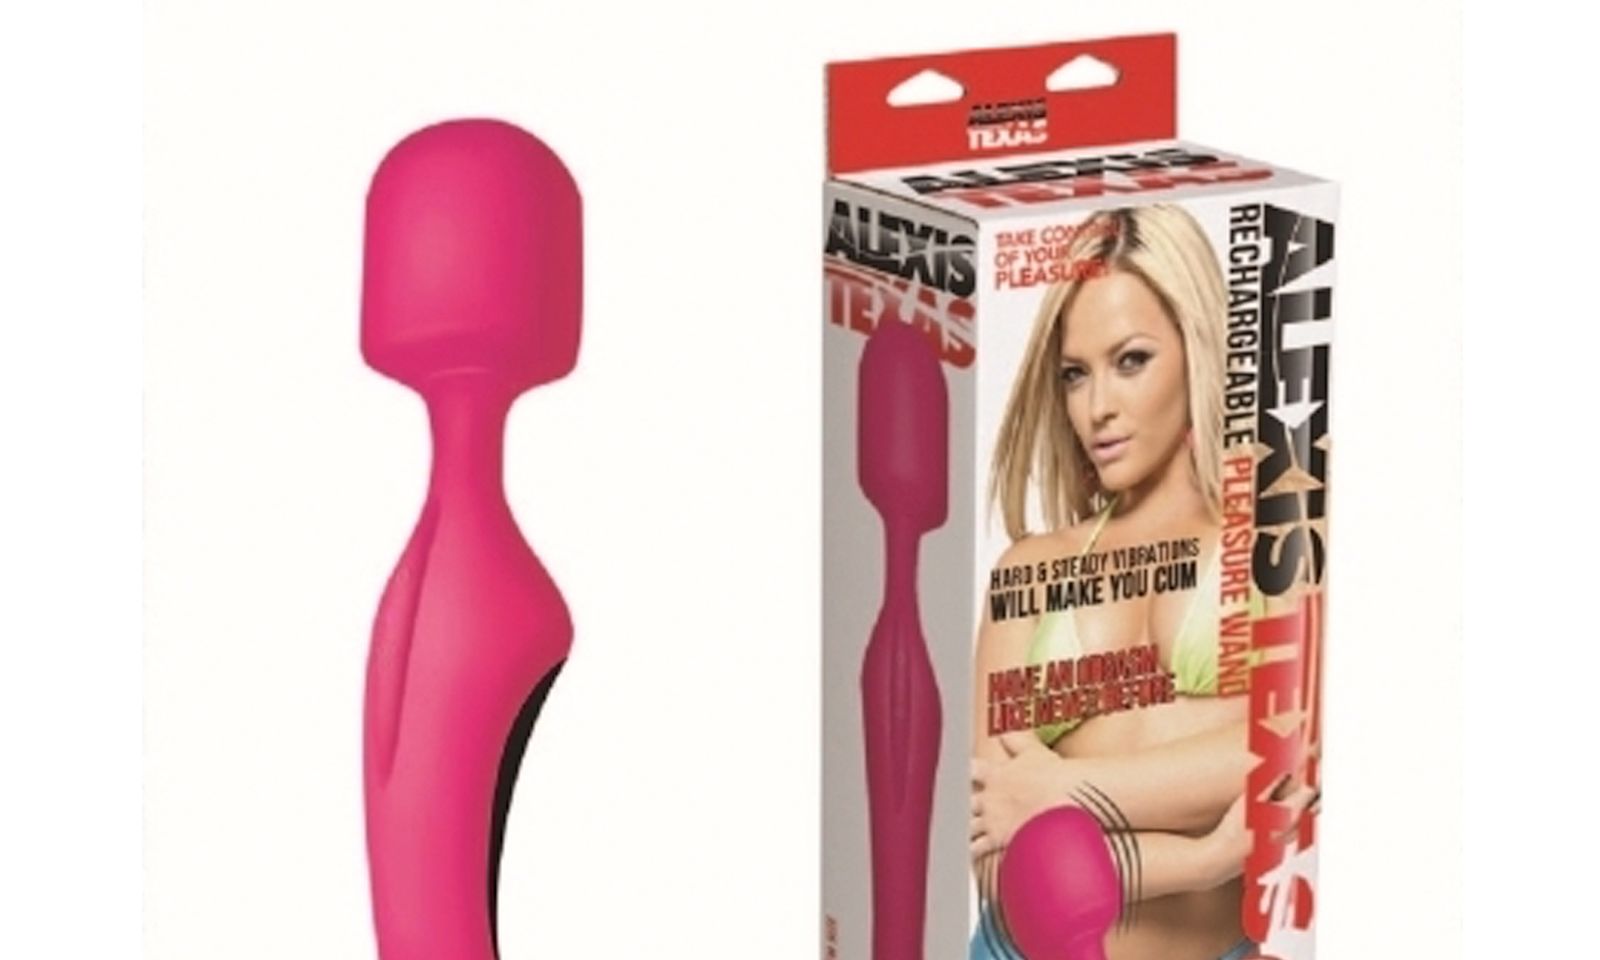 Four New Alexis Texas Toys Debut From Cousins Group